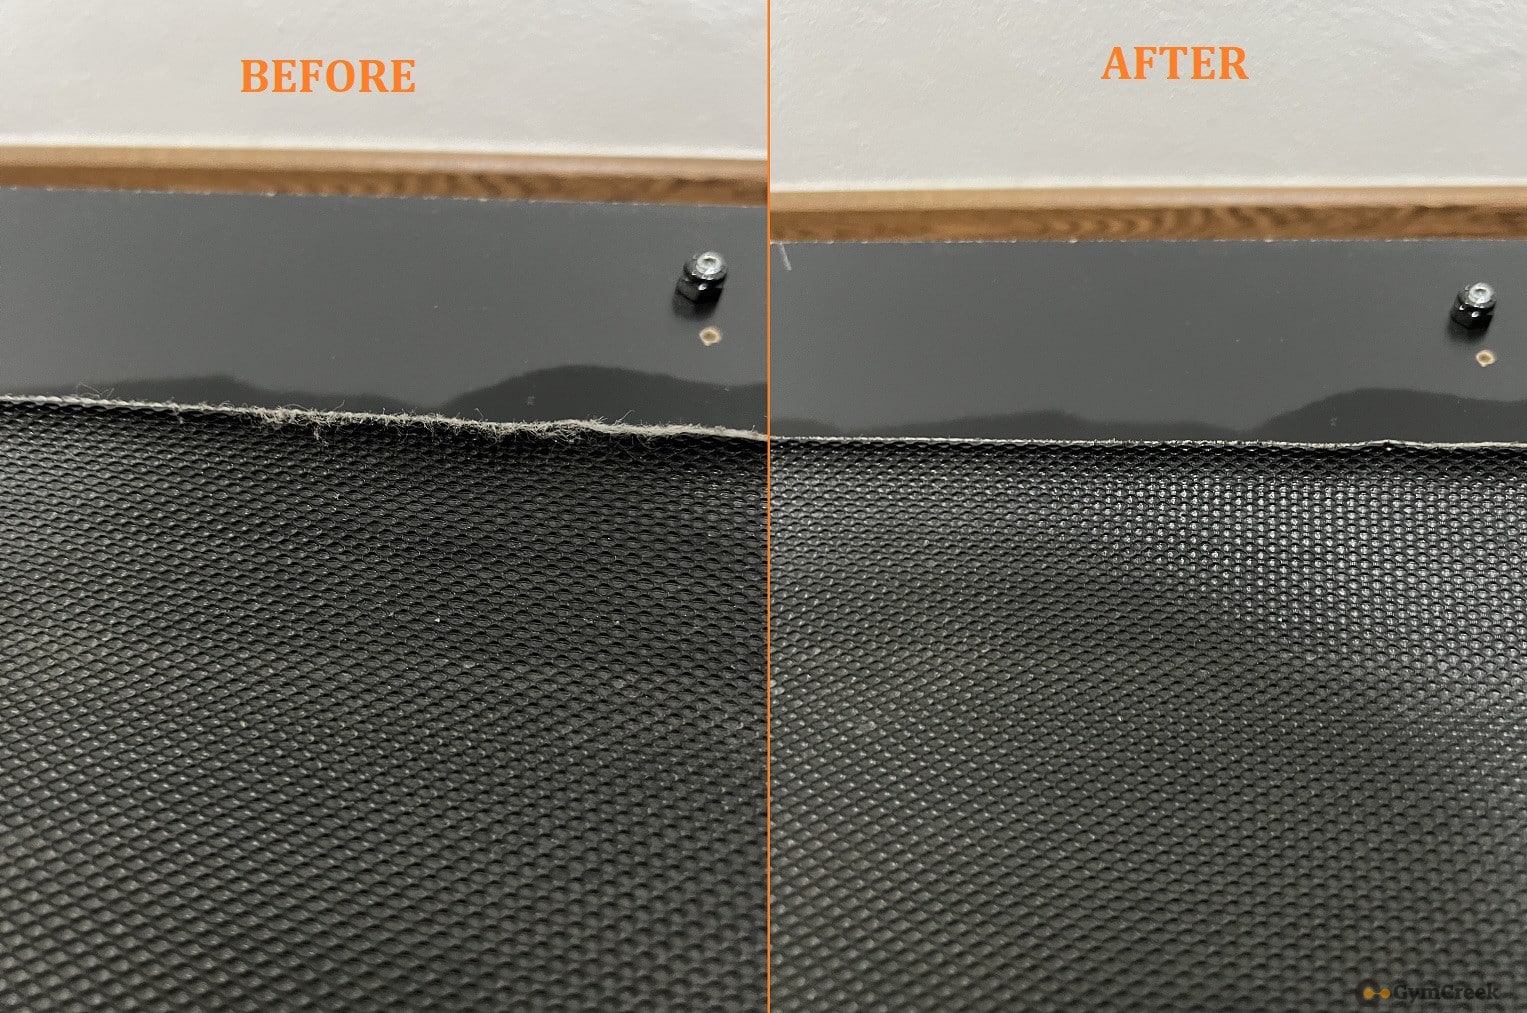 nordictrack treadmill belt before and after fray removal